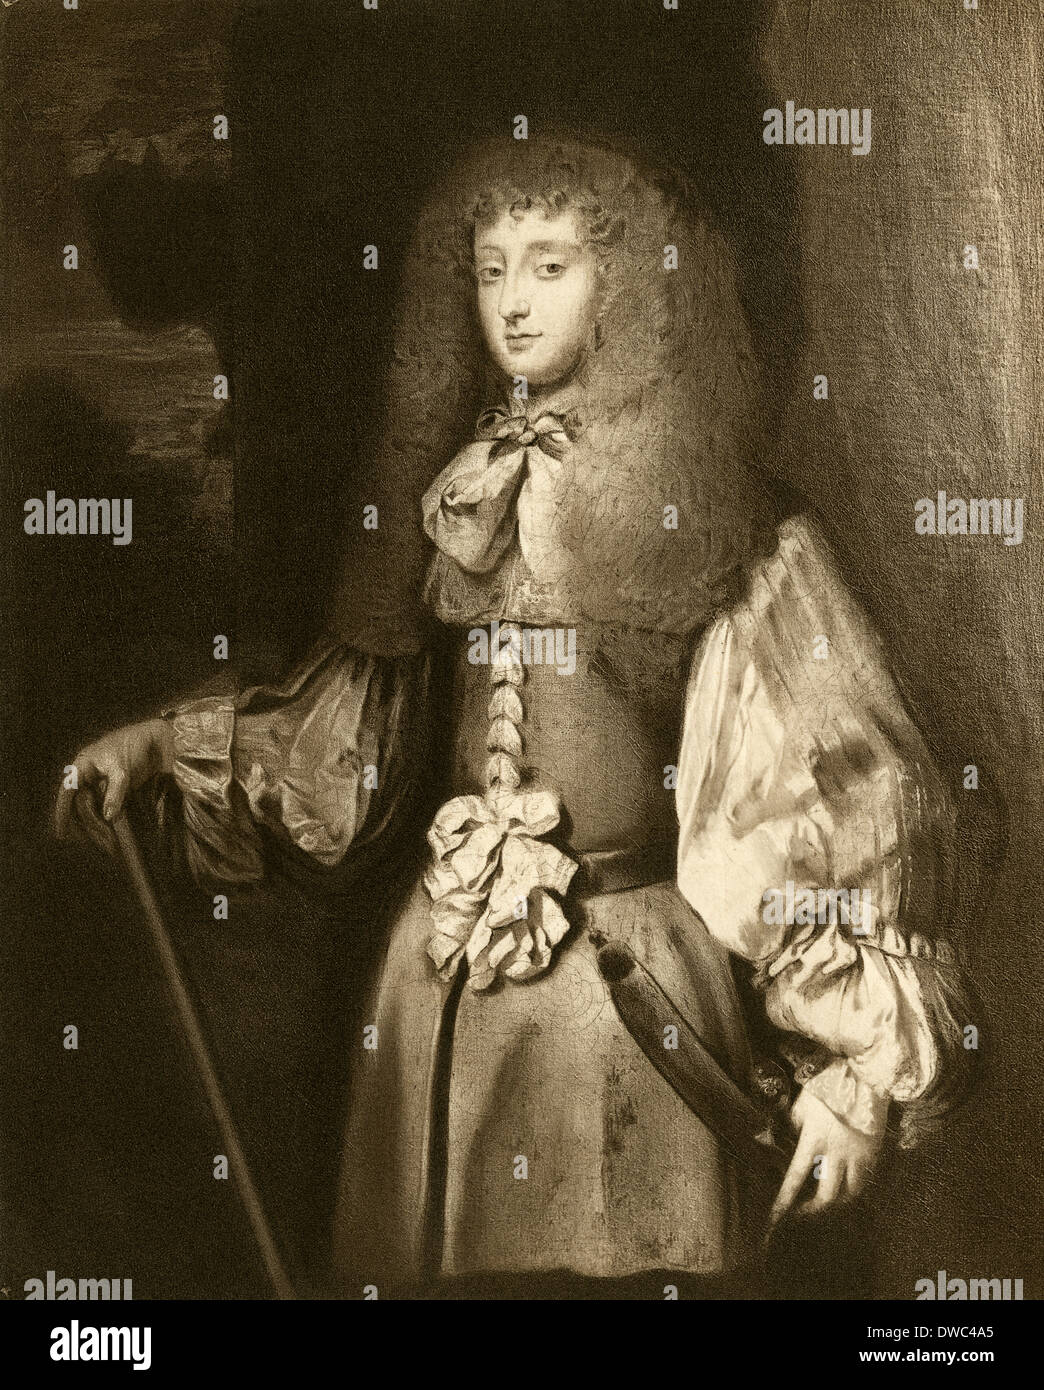 Antique engraving, Frances Teresa Stewart, Duchess of Richmond dressed in men's clothing and wearing a doublet like a soldier. Stock Photo